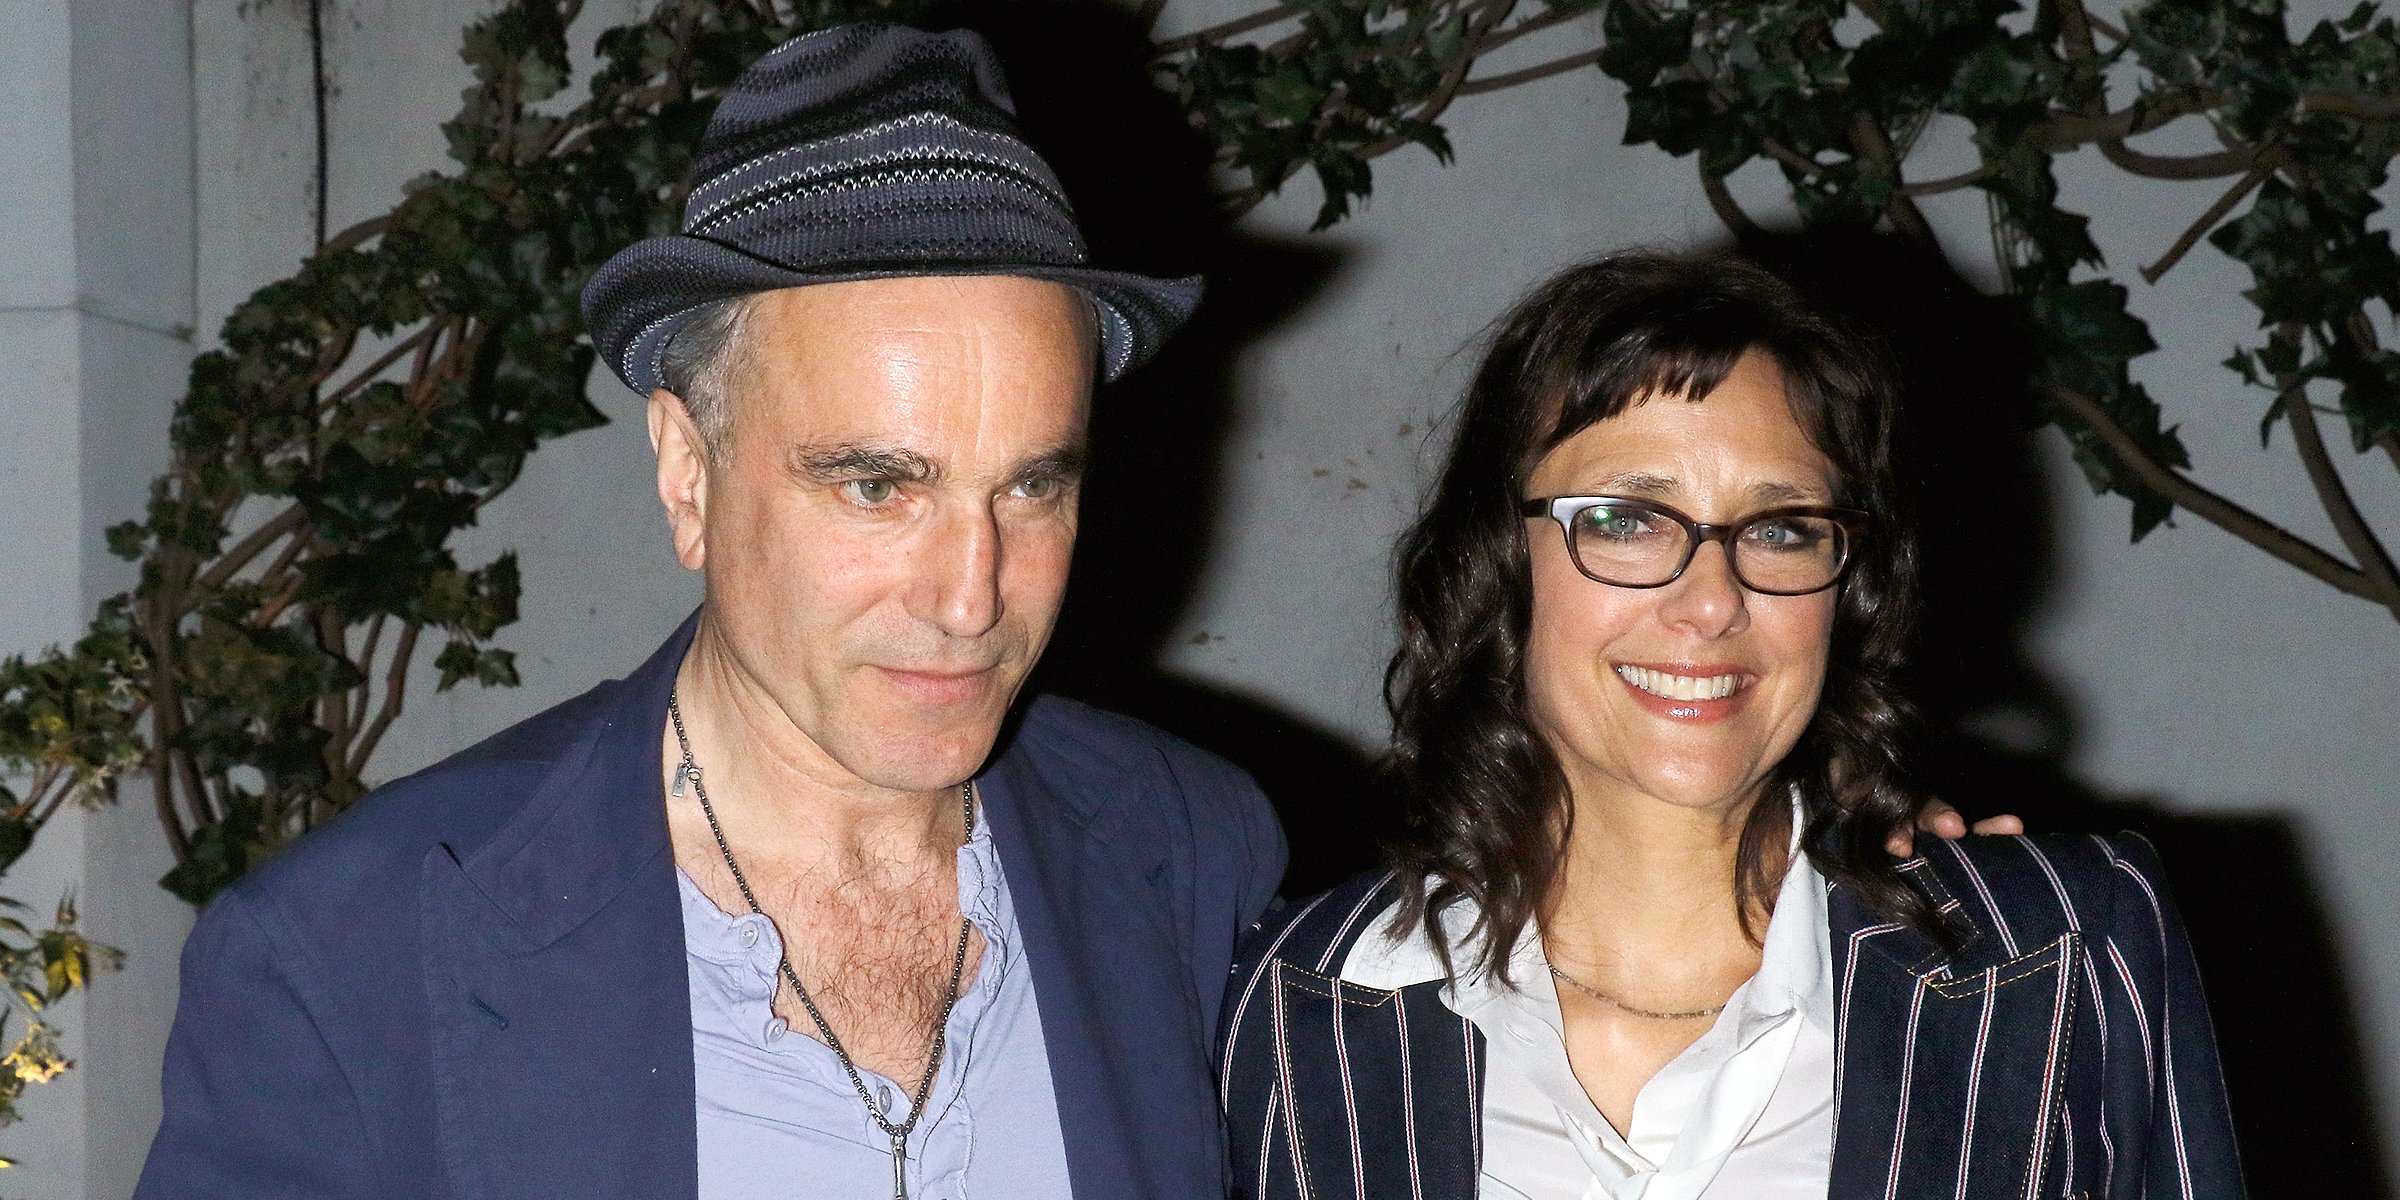 Daniel Day-Lewis and Rebecca Miller | Source: Getty Images